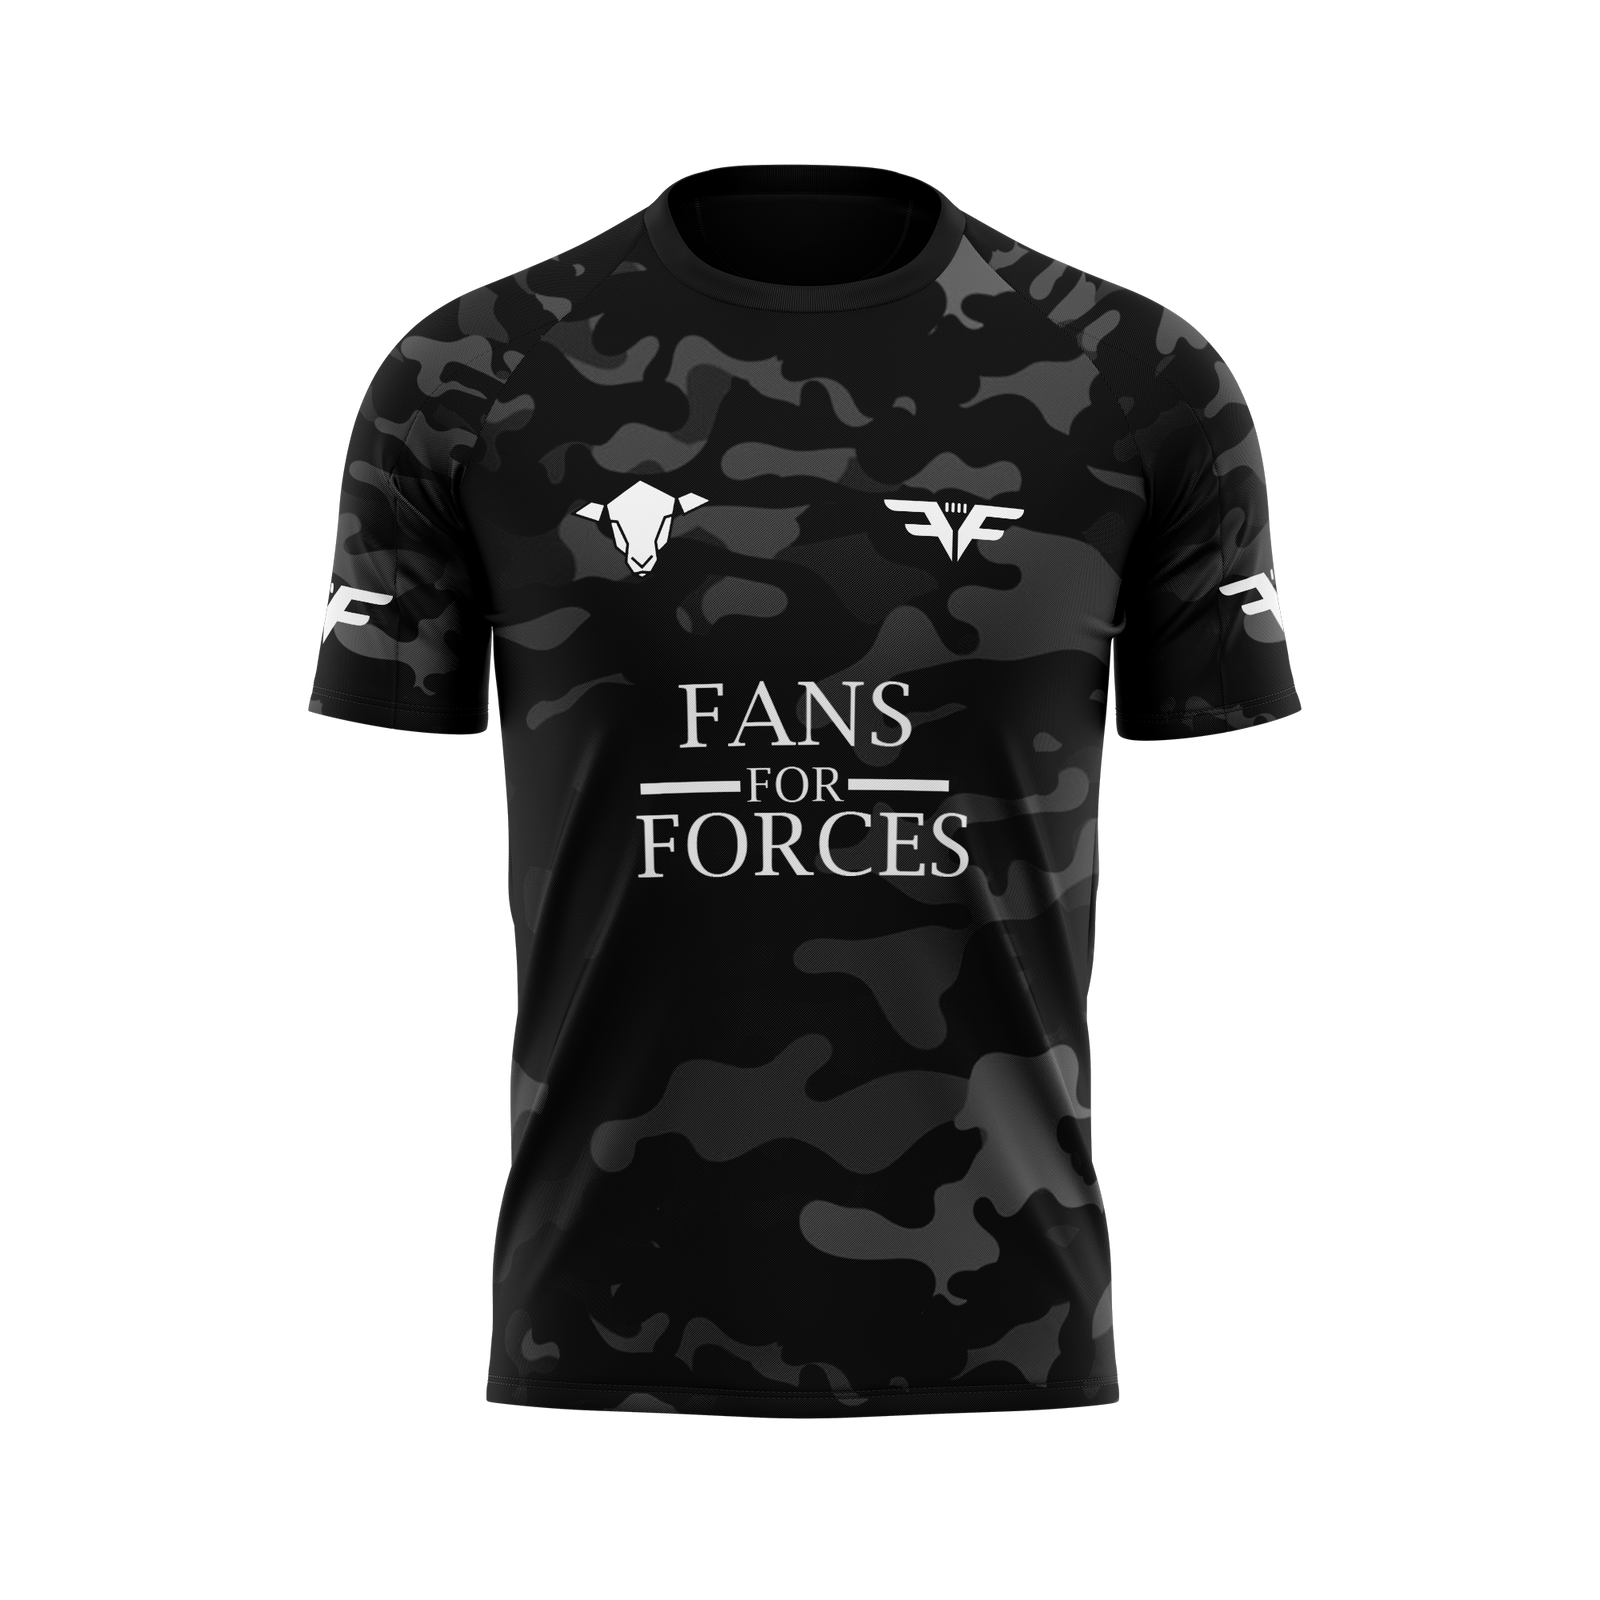 Childrens Fans for Forces Blackout Charity Tee